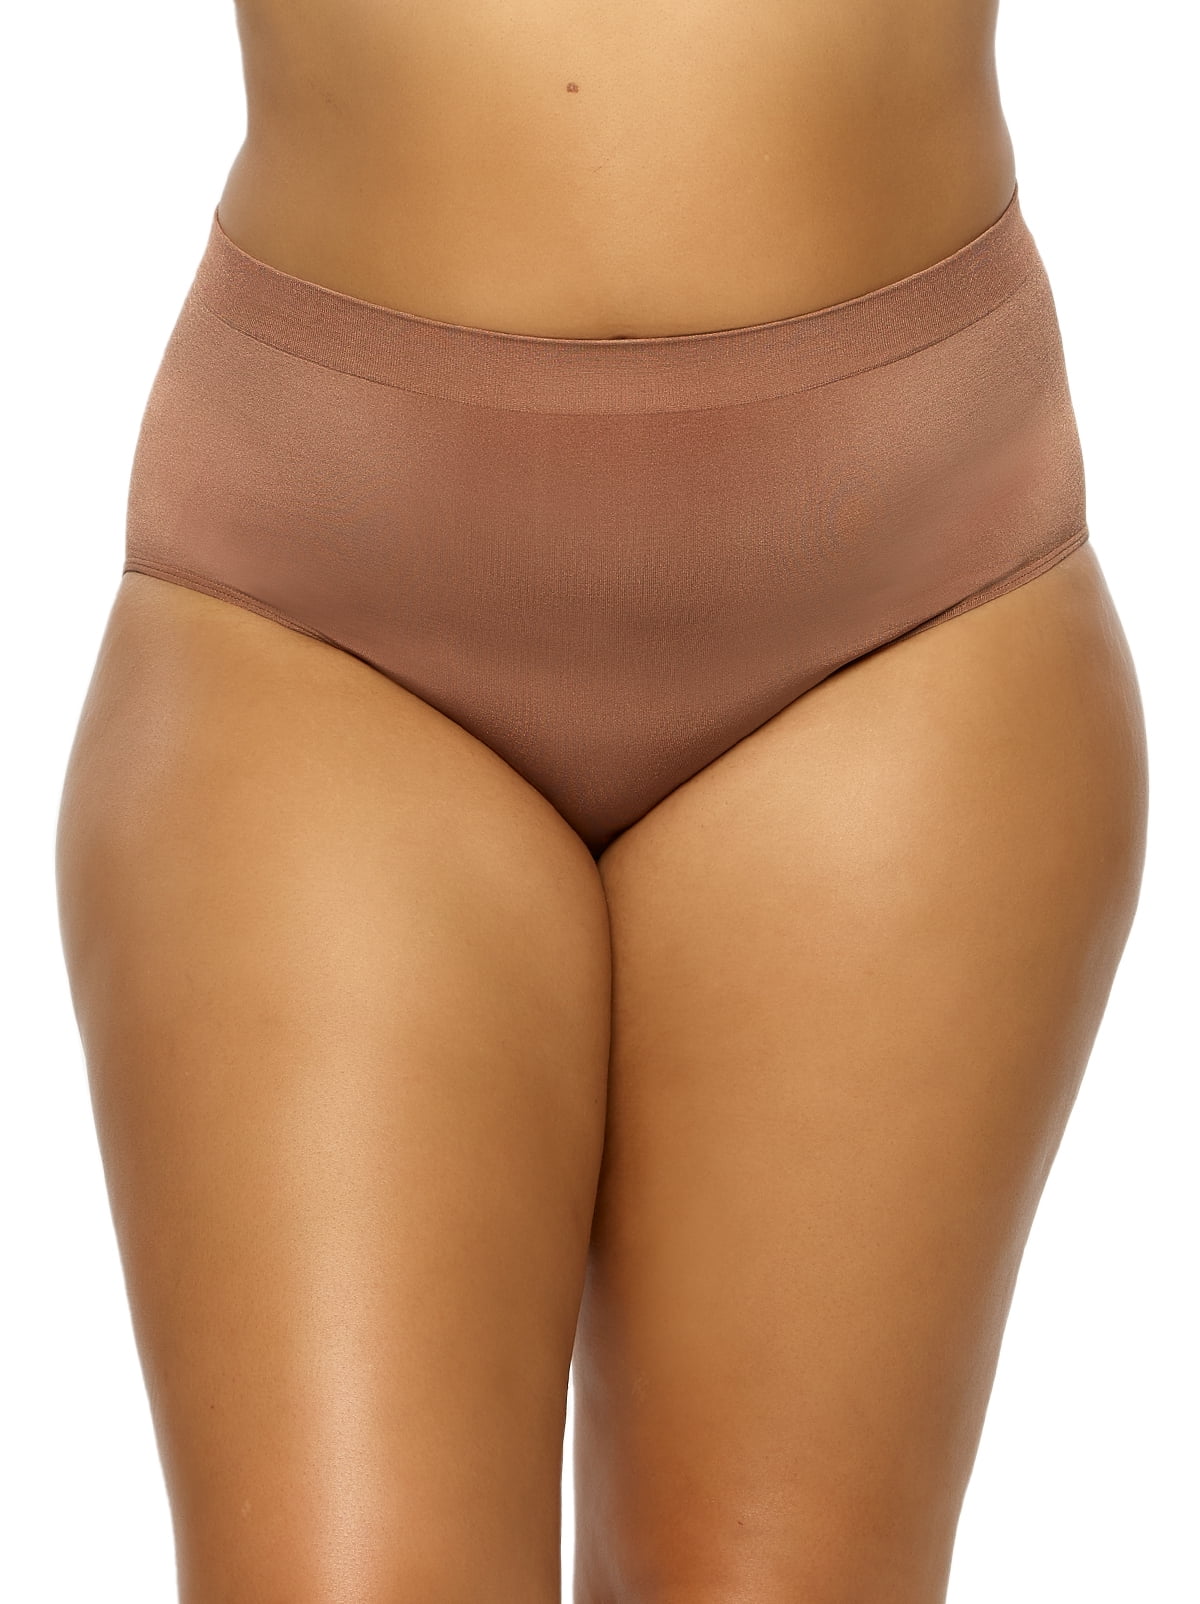 Paramour by Felina | Body Smooth Seamless Brief | No Visible Panty Lines  (Hazelnut, X-Large)